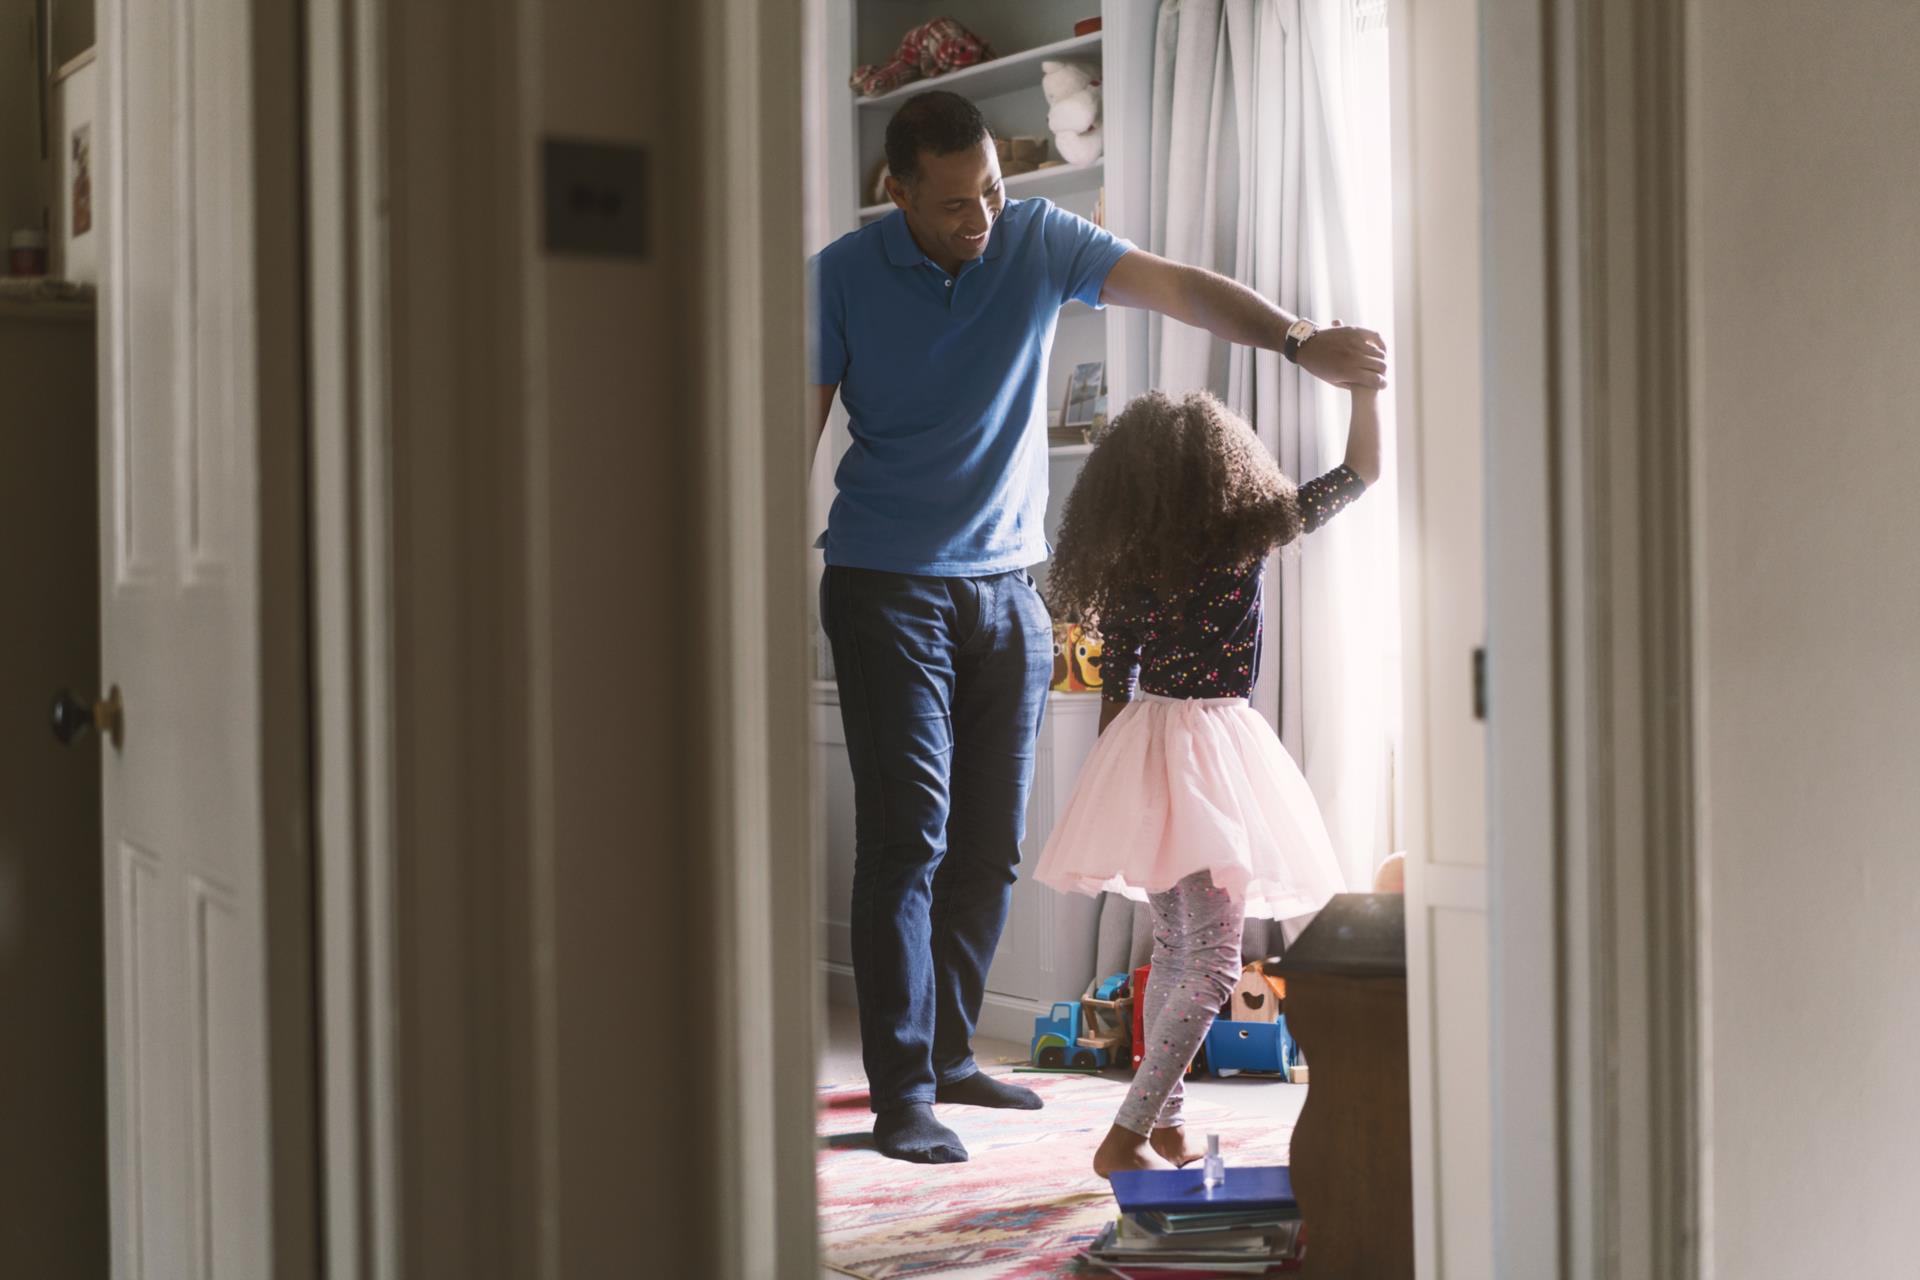 A caregiver and older child wearing a tutu dancing at home.